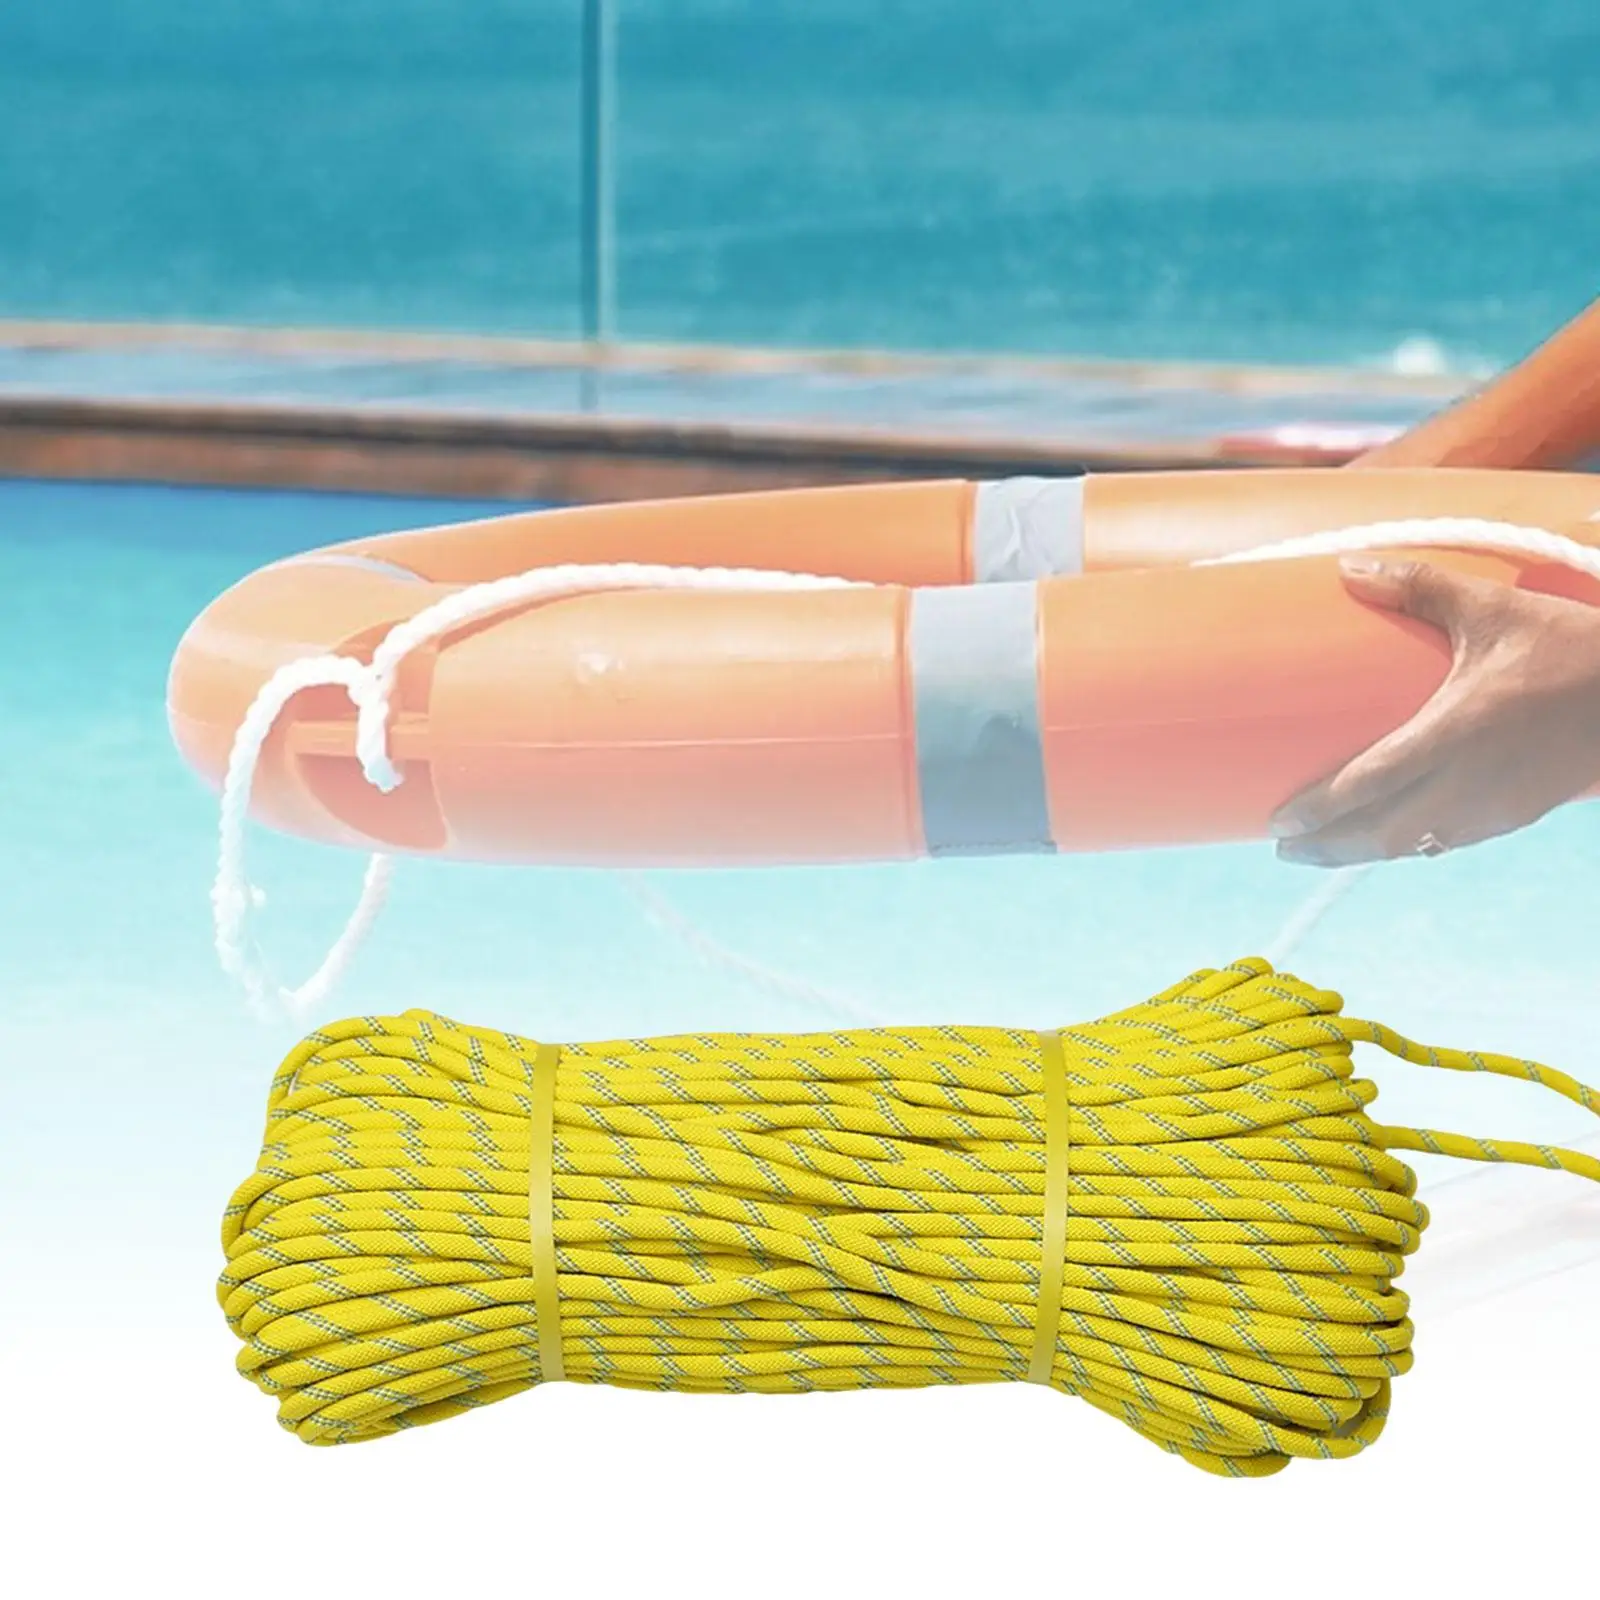 30M Floating Rope Accessory Flotation Device High Visibility Throwable Rope for Yacht Sailing Swimming Kayaking Outdoor Rafting